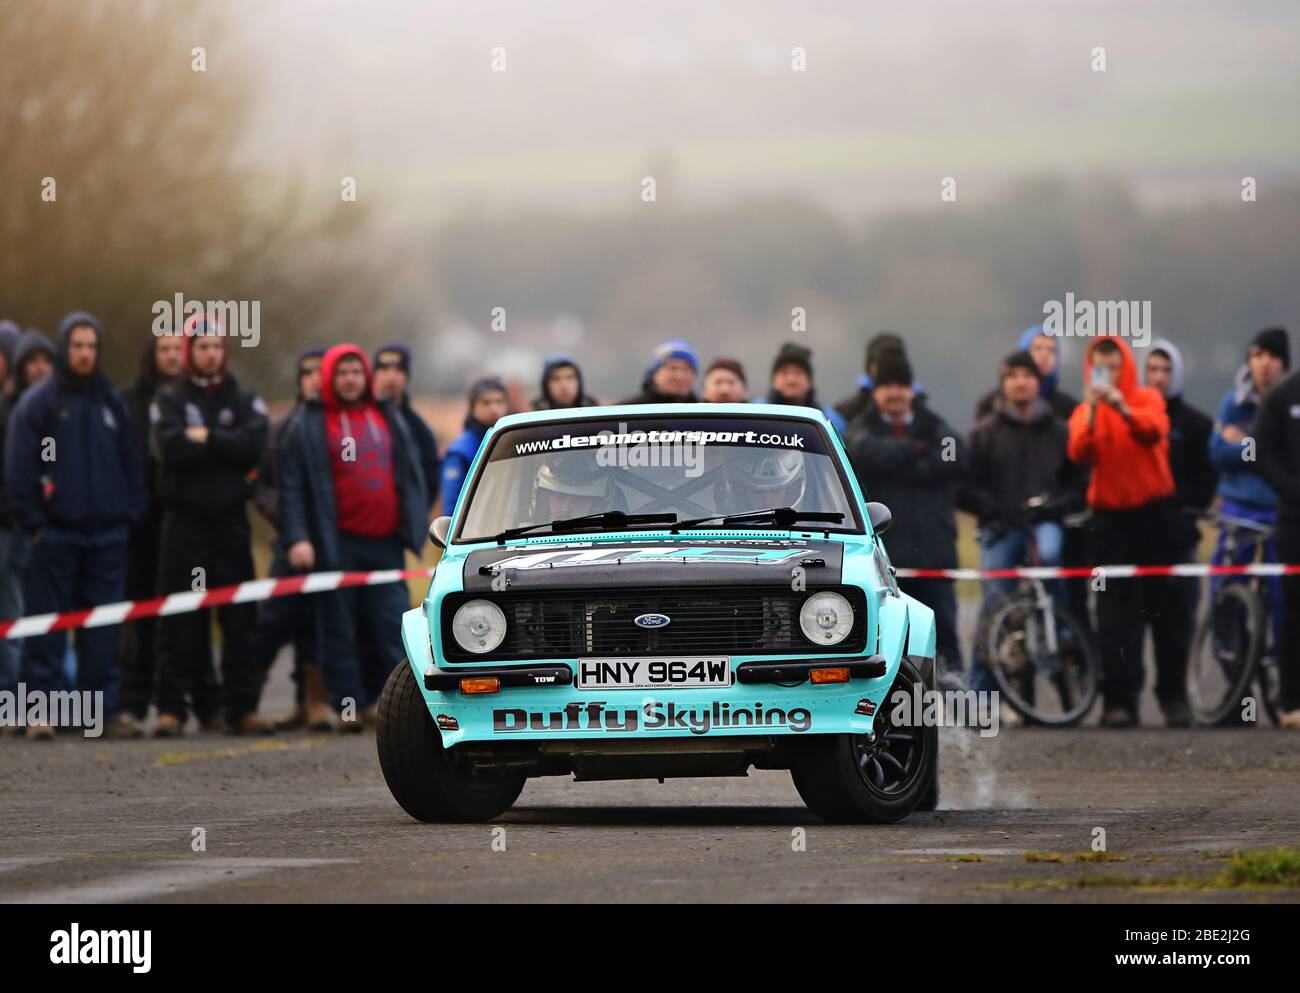 Irish road racing legend MIchael Dunlop enjoys rallying his Ford Escort mk2  in the down season from motorcycle road racing Stock Photo - Alamy